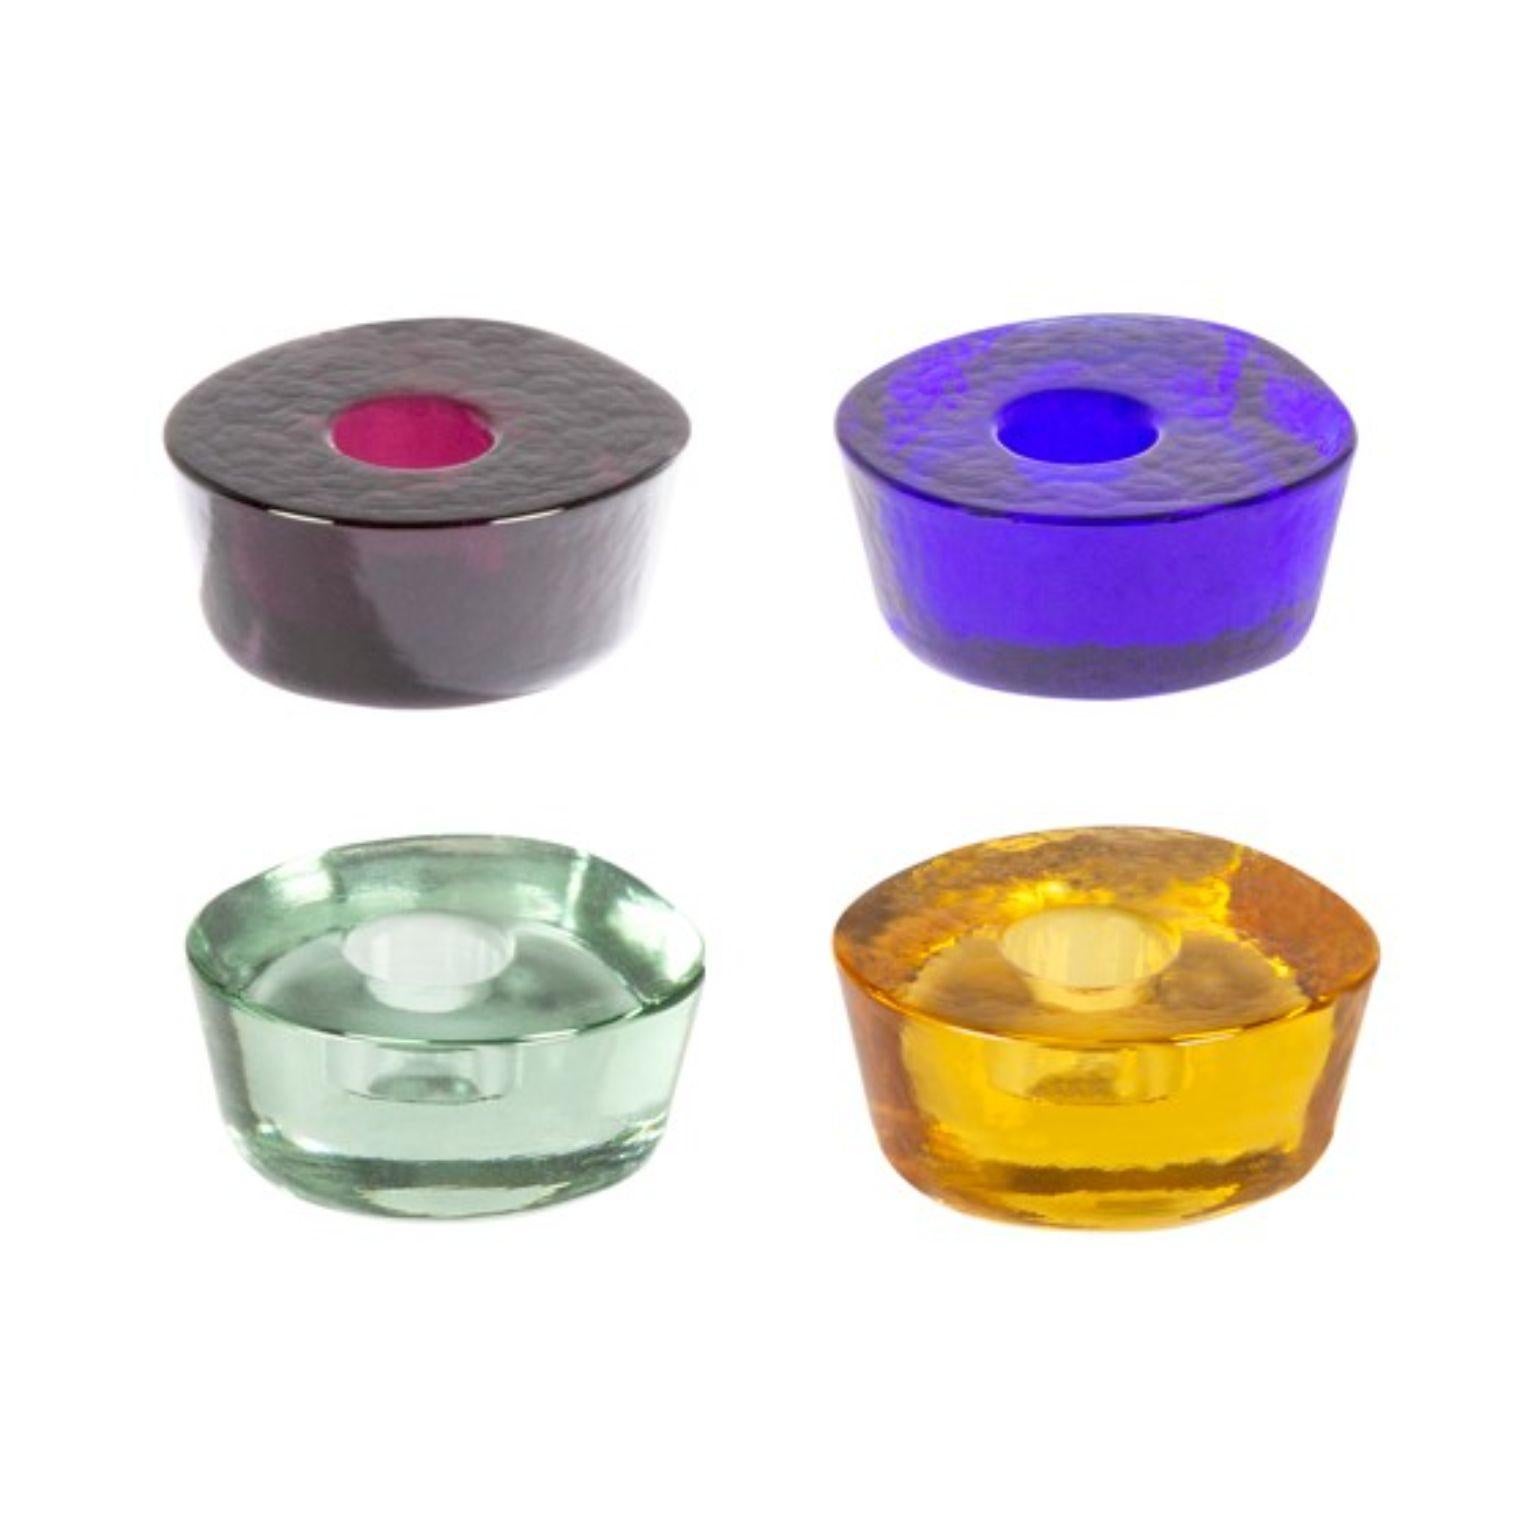 Set of 4 atoll small candle holders by Pulpo
Dimensions: D8 x W7.5 x H4 cm.
Materials: Casted glass.

Also available in different colours. 

These simple forms refer to the freeform nature of volcanic islands – much like the changing of glass